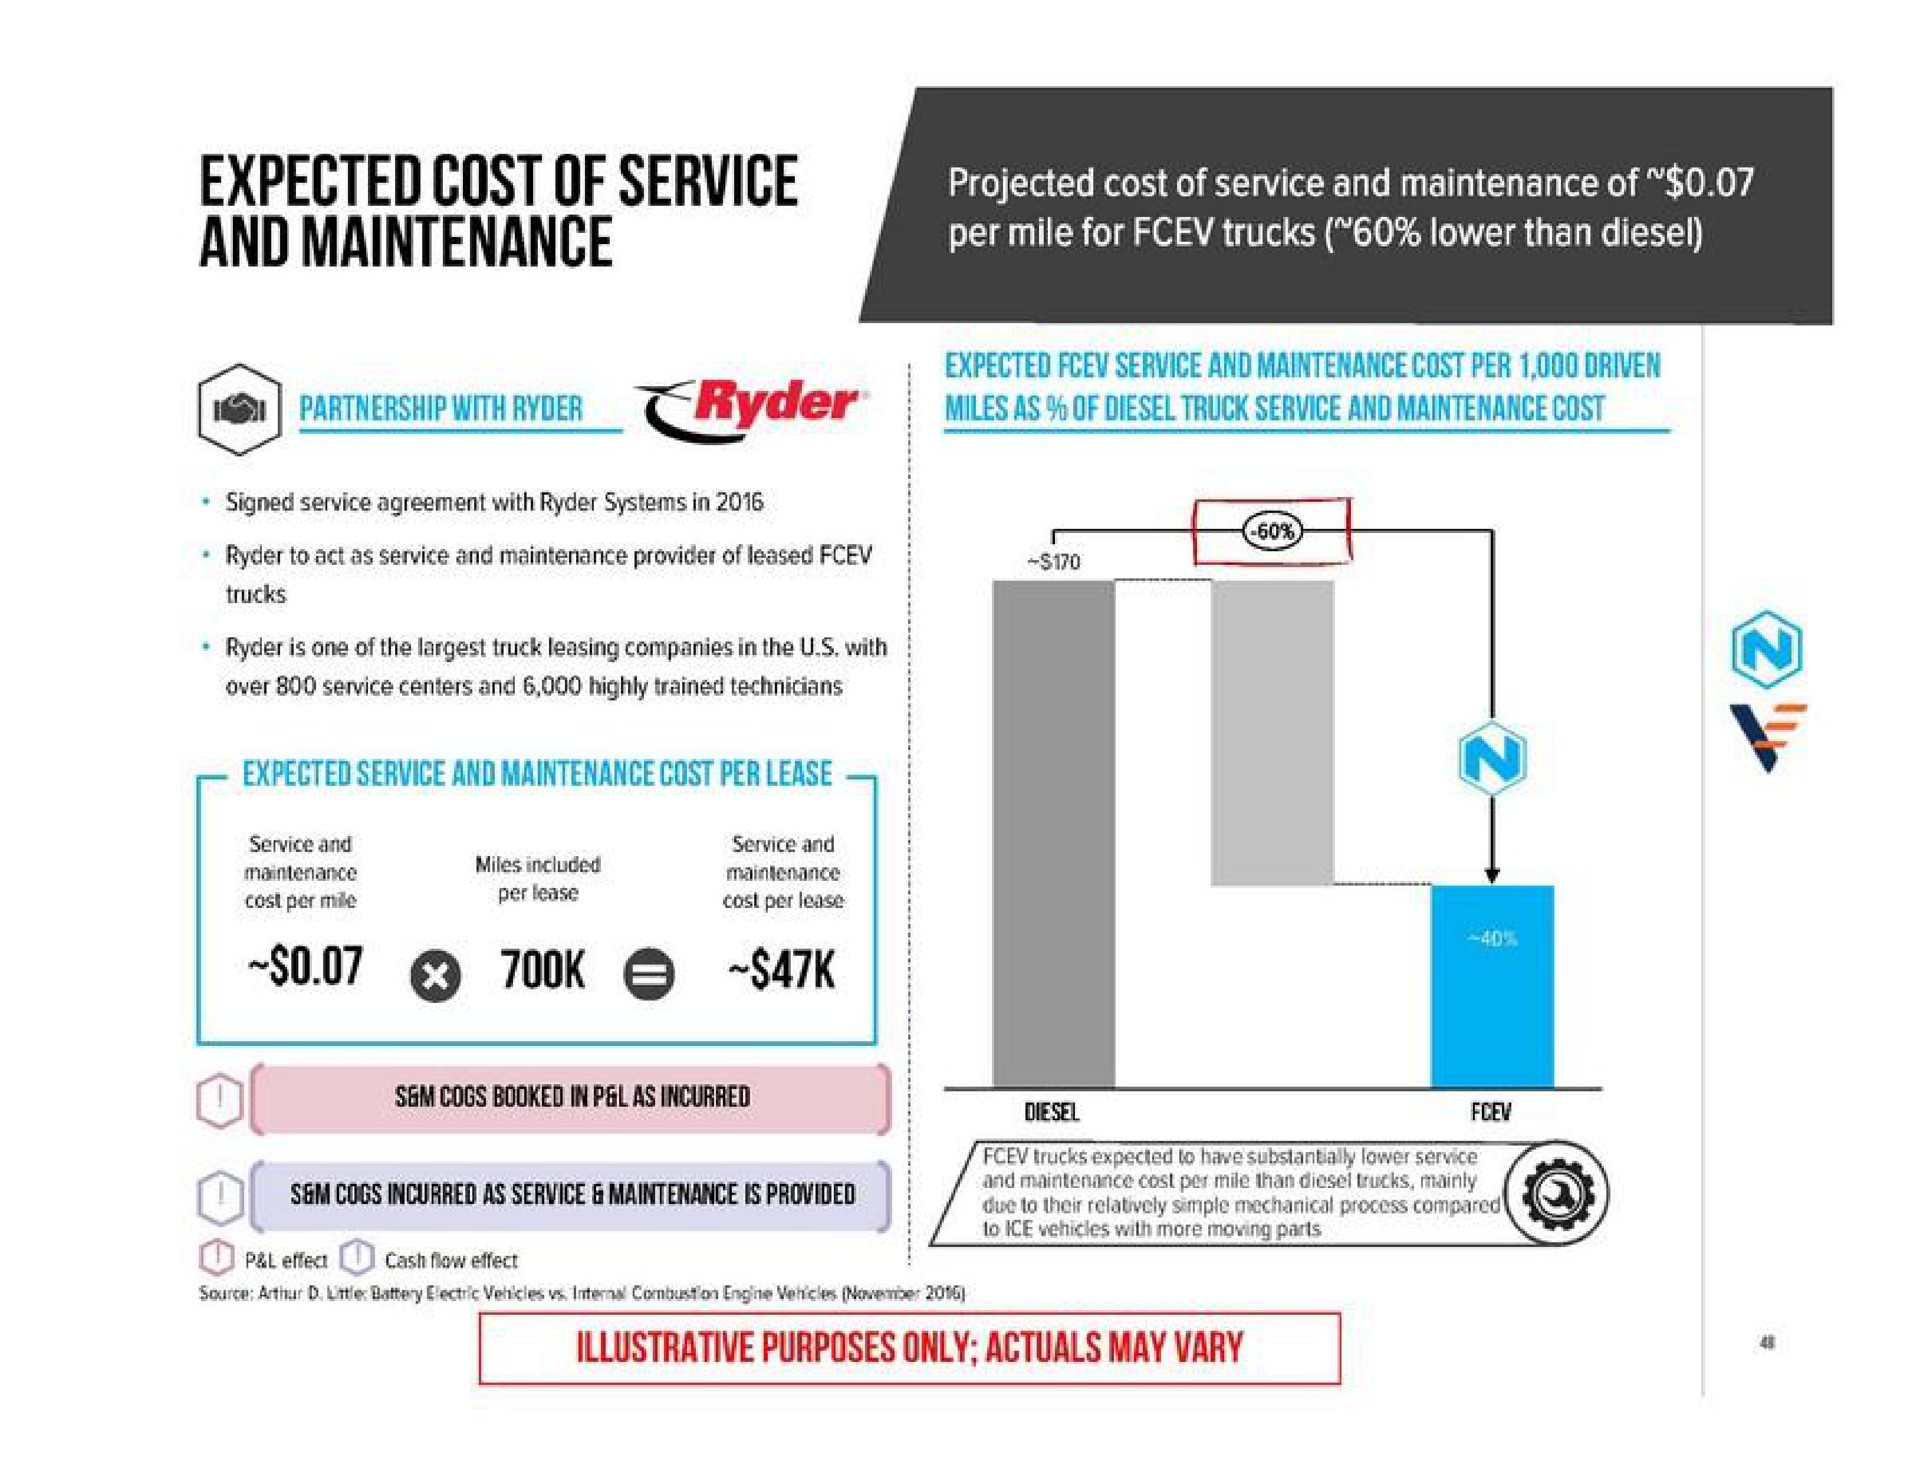 expected service and maintenance cost per driven partnership with ryder miles as of diesel truck and maintenance cost a cogs booked in as incurred sai coss incurred as service maintenance is provided | Nikola